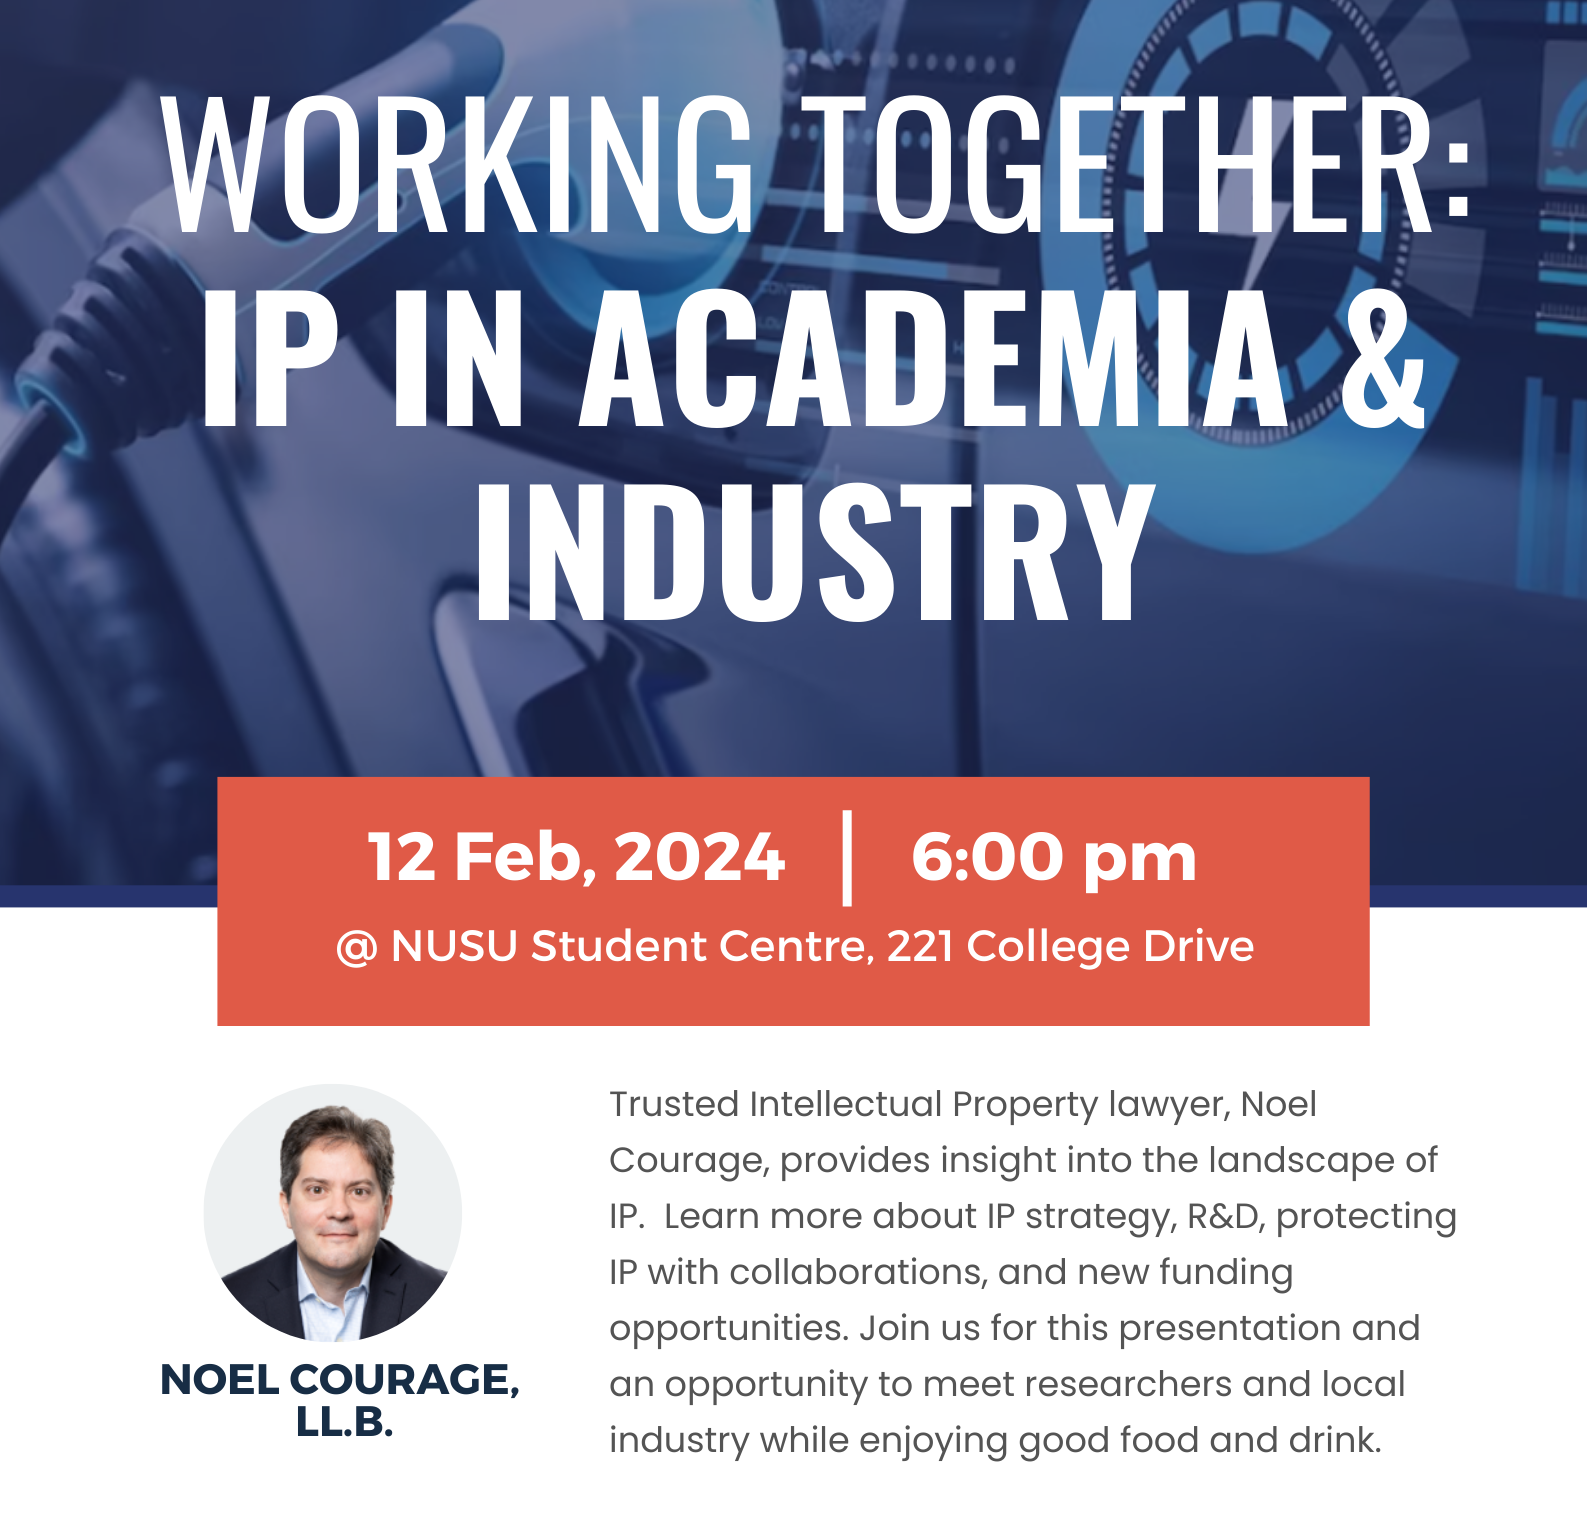 Event poster, "Working Together: IP in Academia & Industry," Feb 12 at 6 pm, NUSU Student Centre